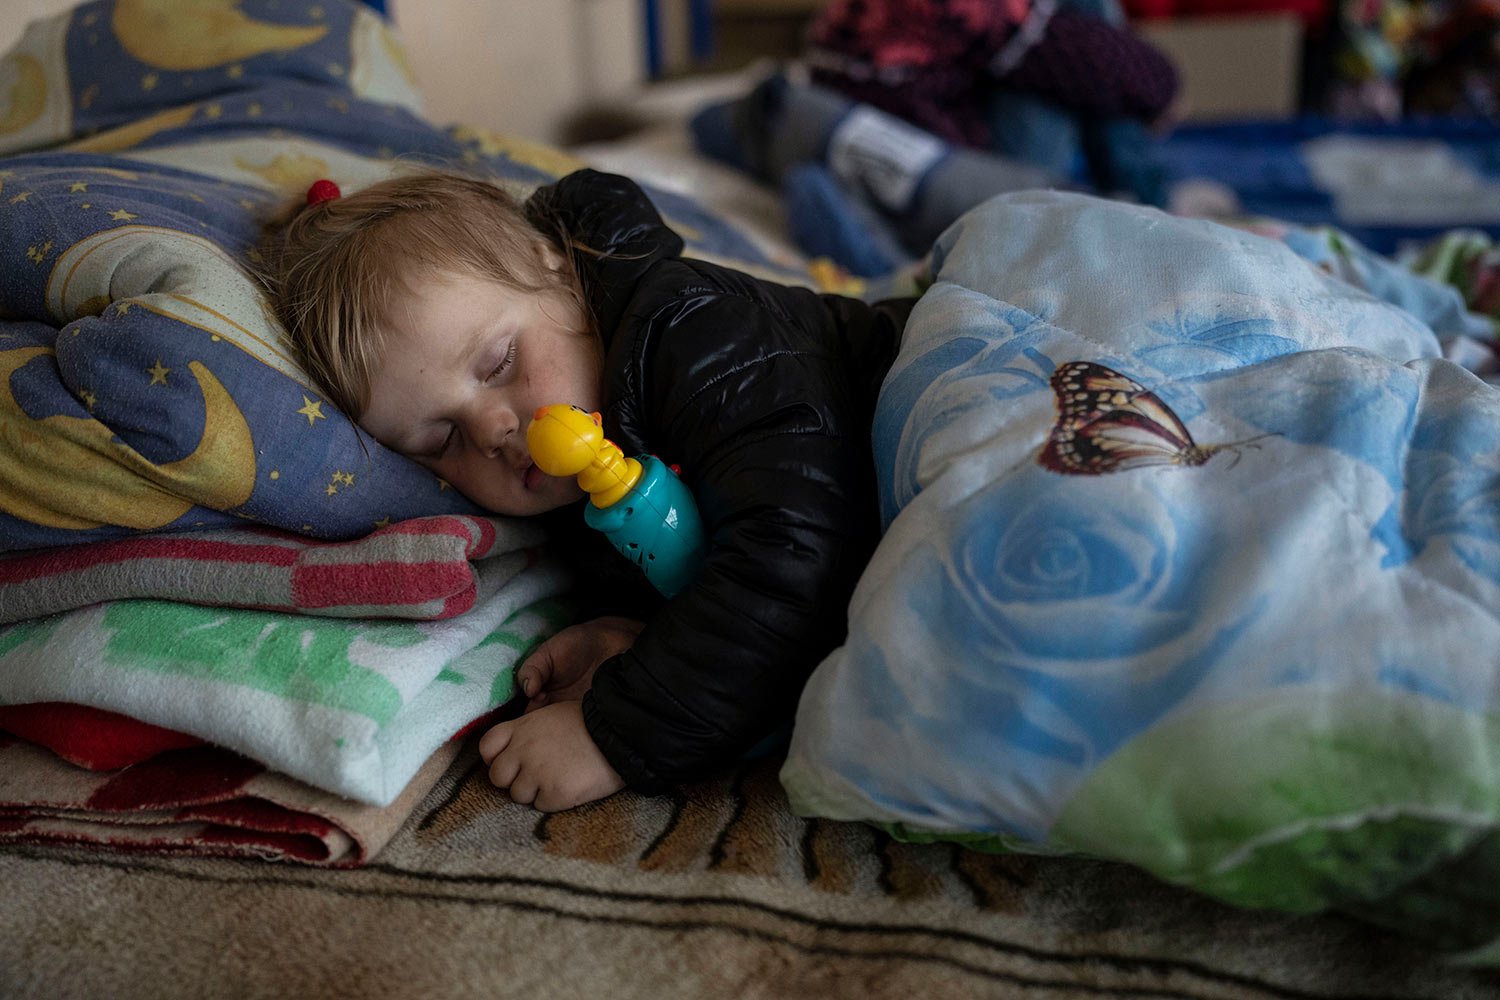  Carolina Fedorova, 3, sleeps inside a school that is being used as a shelter for people who fled the war, in Dnipro city, Ukraine on Tuesday, April 12, 2022. Carolina fled with her parents and four siblings from the city of Bahmud. (AP Photo/Petros 